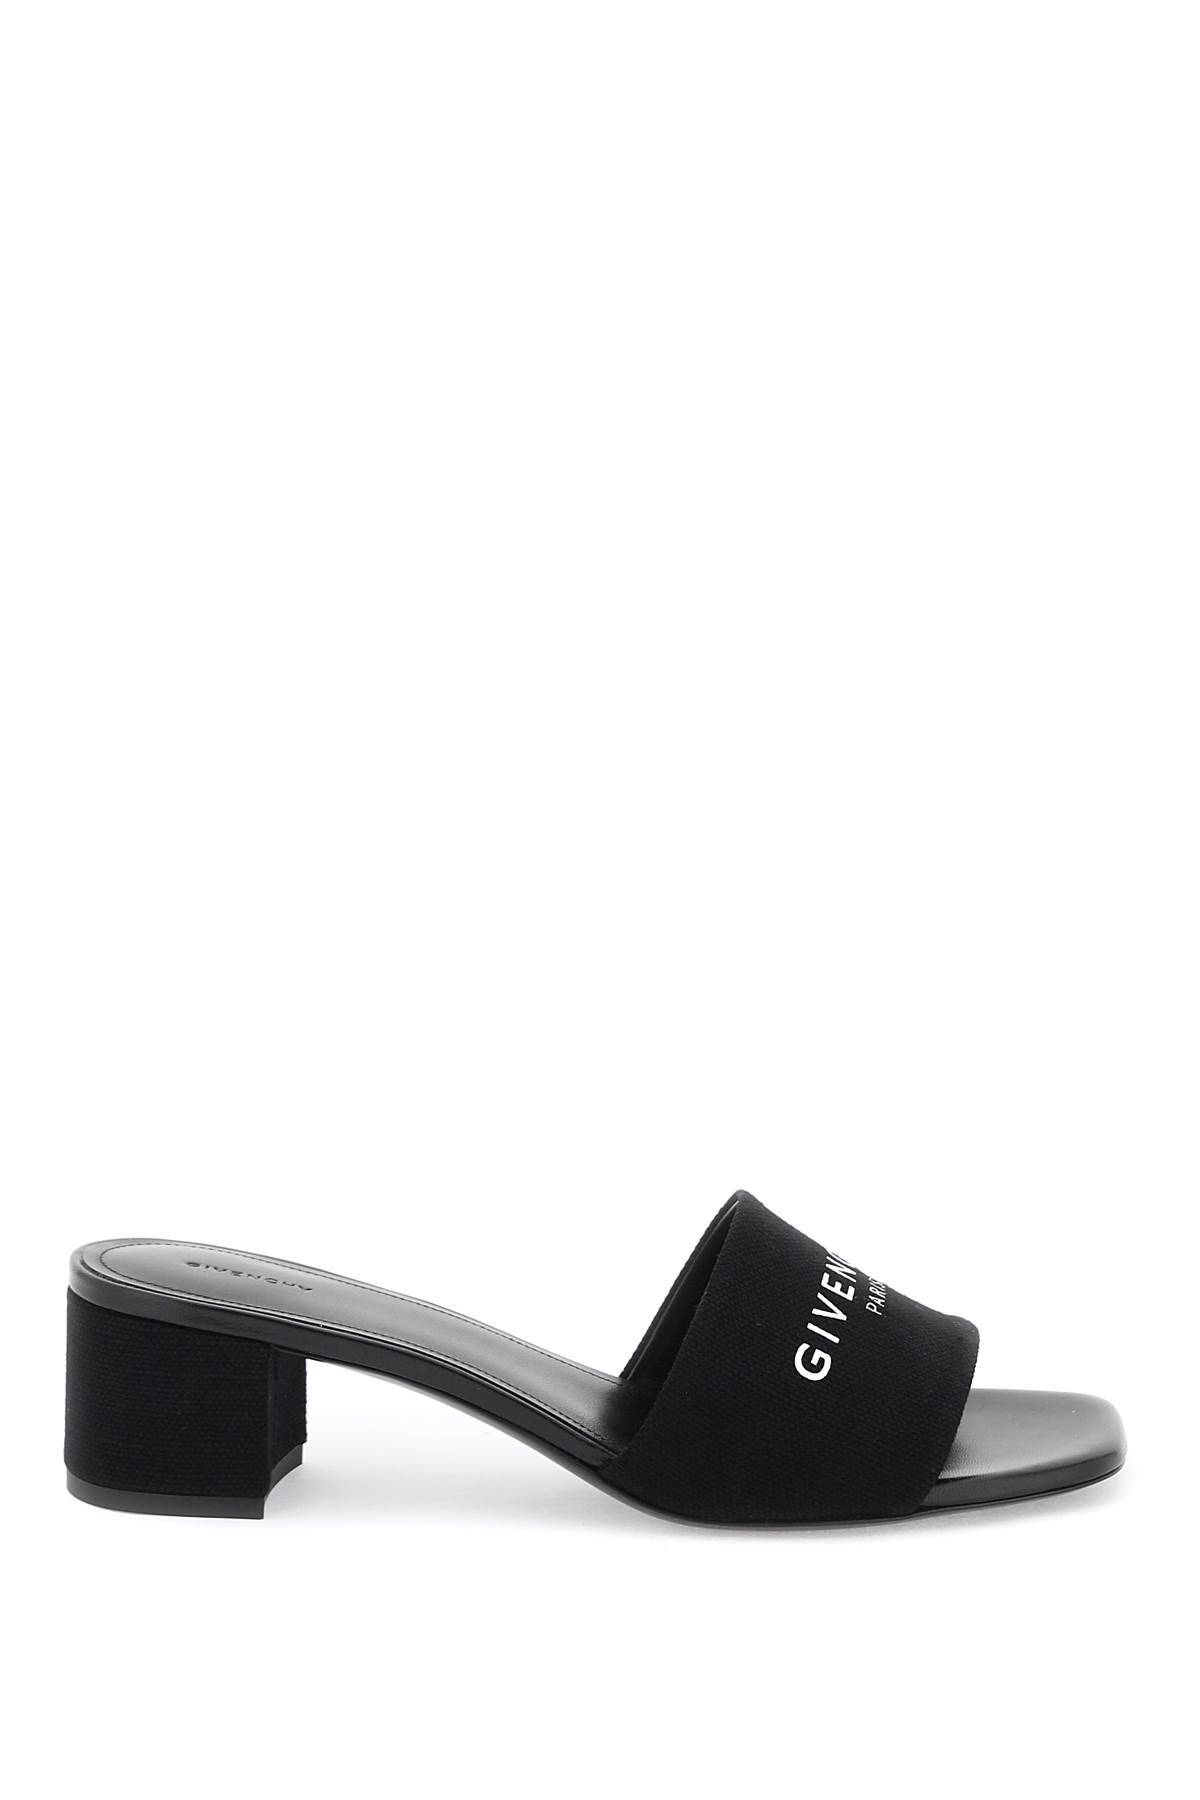 Givenchy GIVENCHY canvas 4g mules